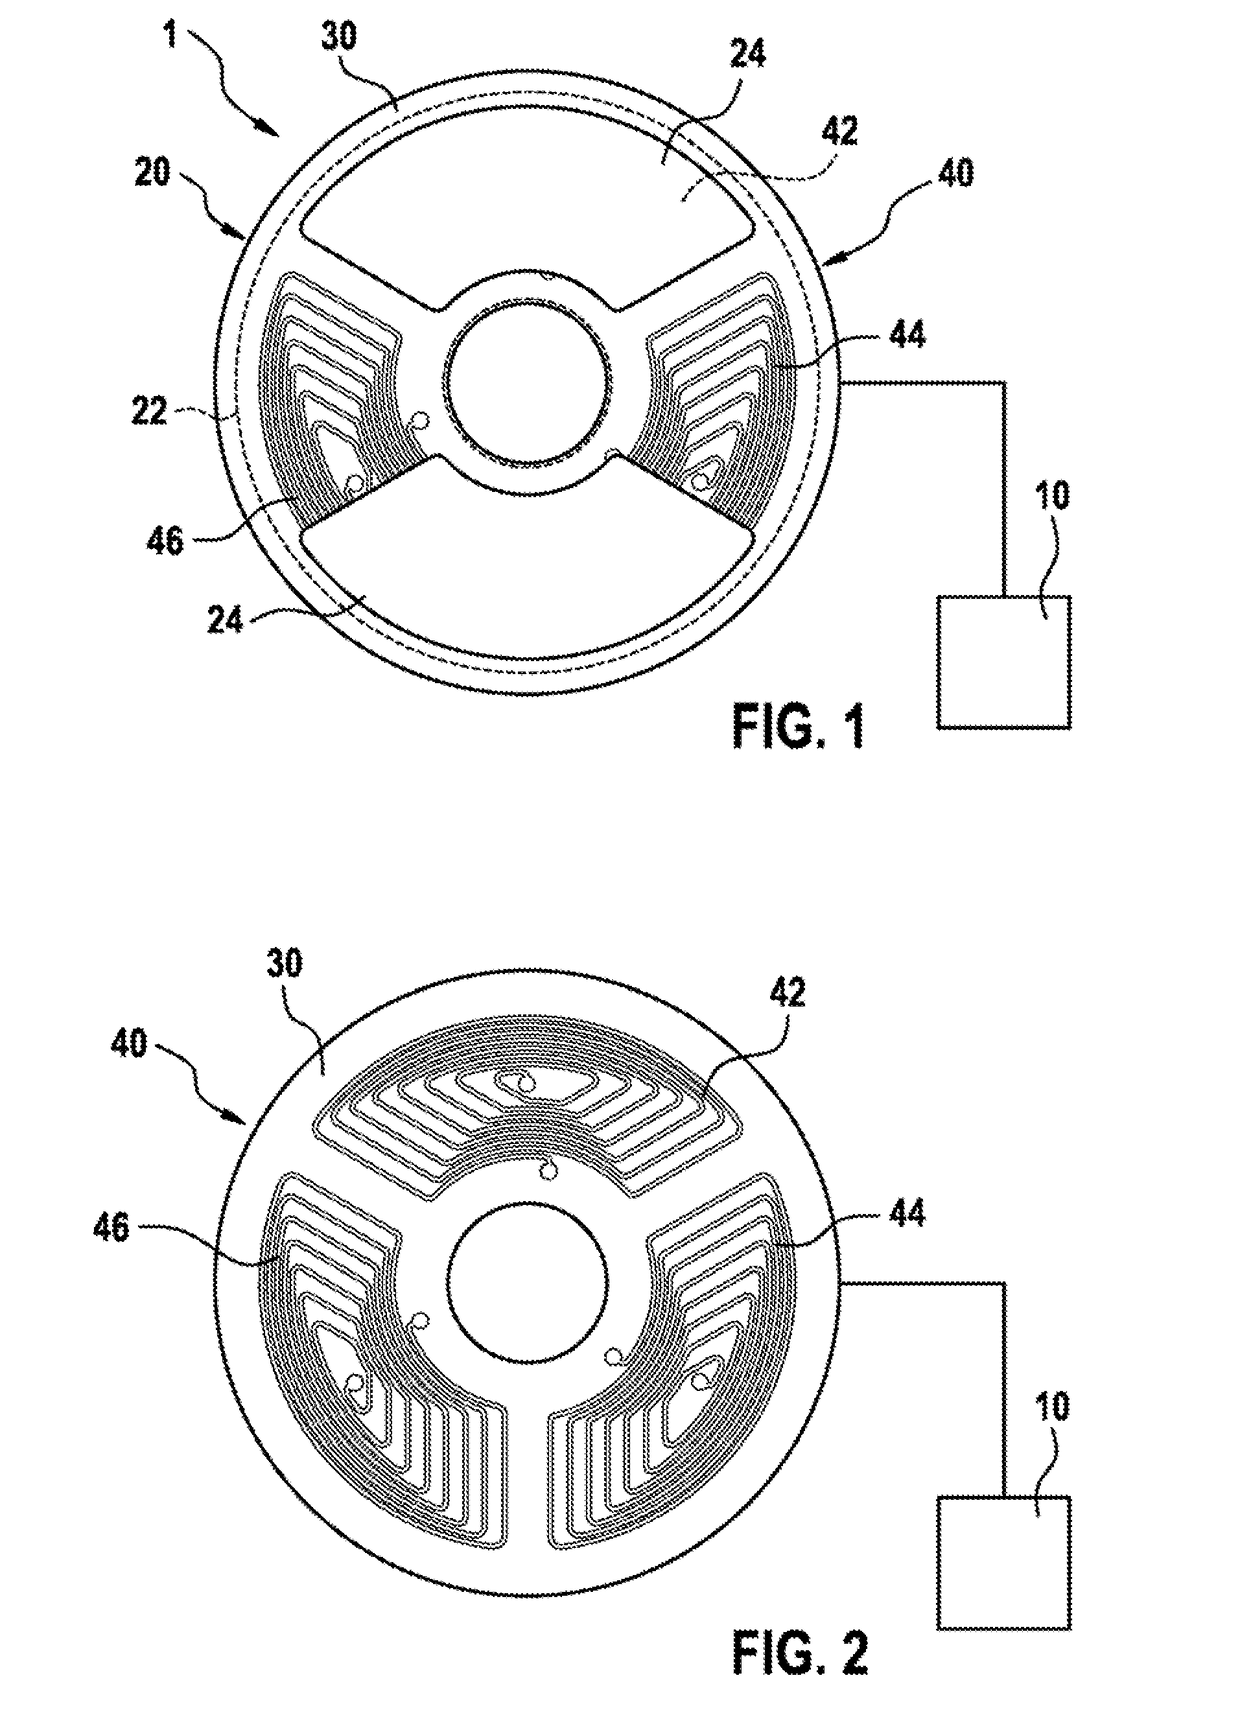 Sensor Arrangement for the Contactless Sensing of Angles of Rotation on a Rotating Part